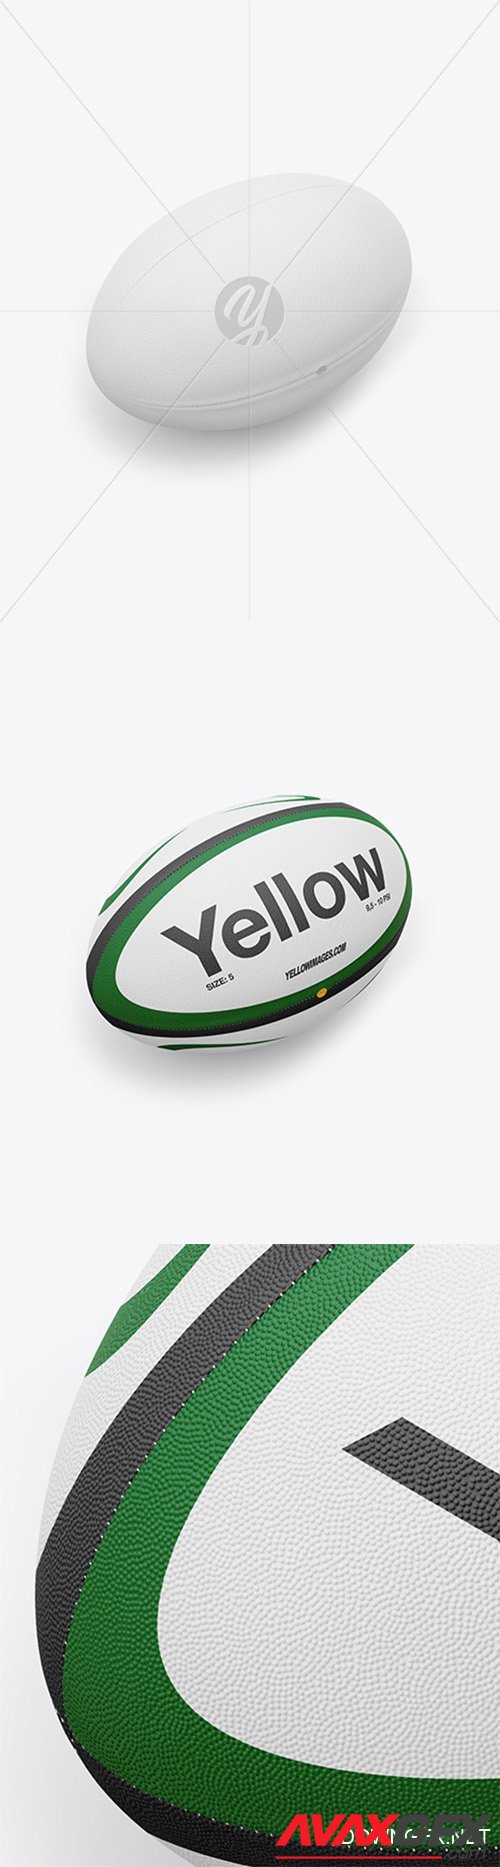 Rugby Ball Mockup - Half Side View 19804 TIF